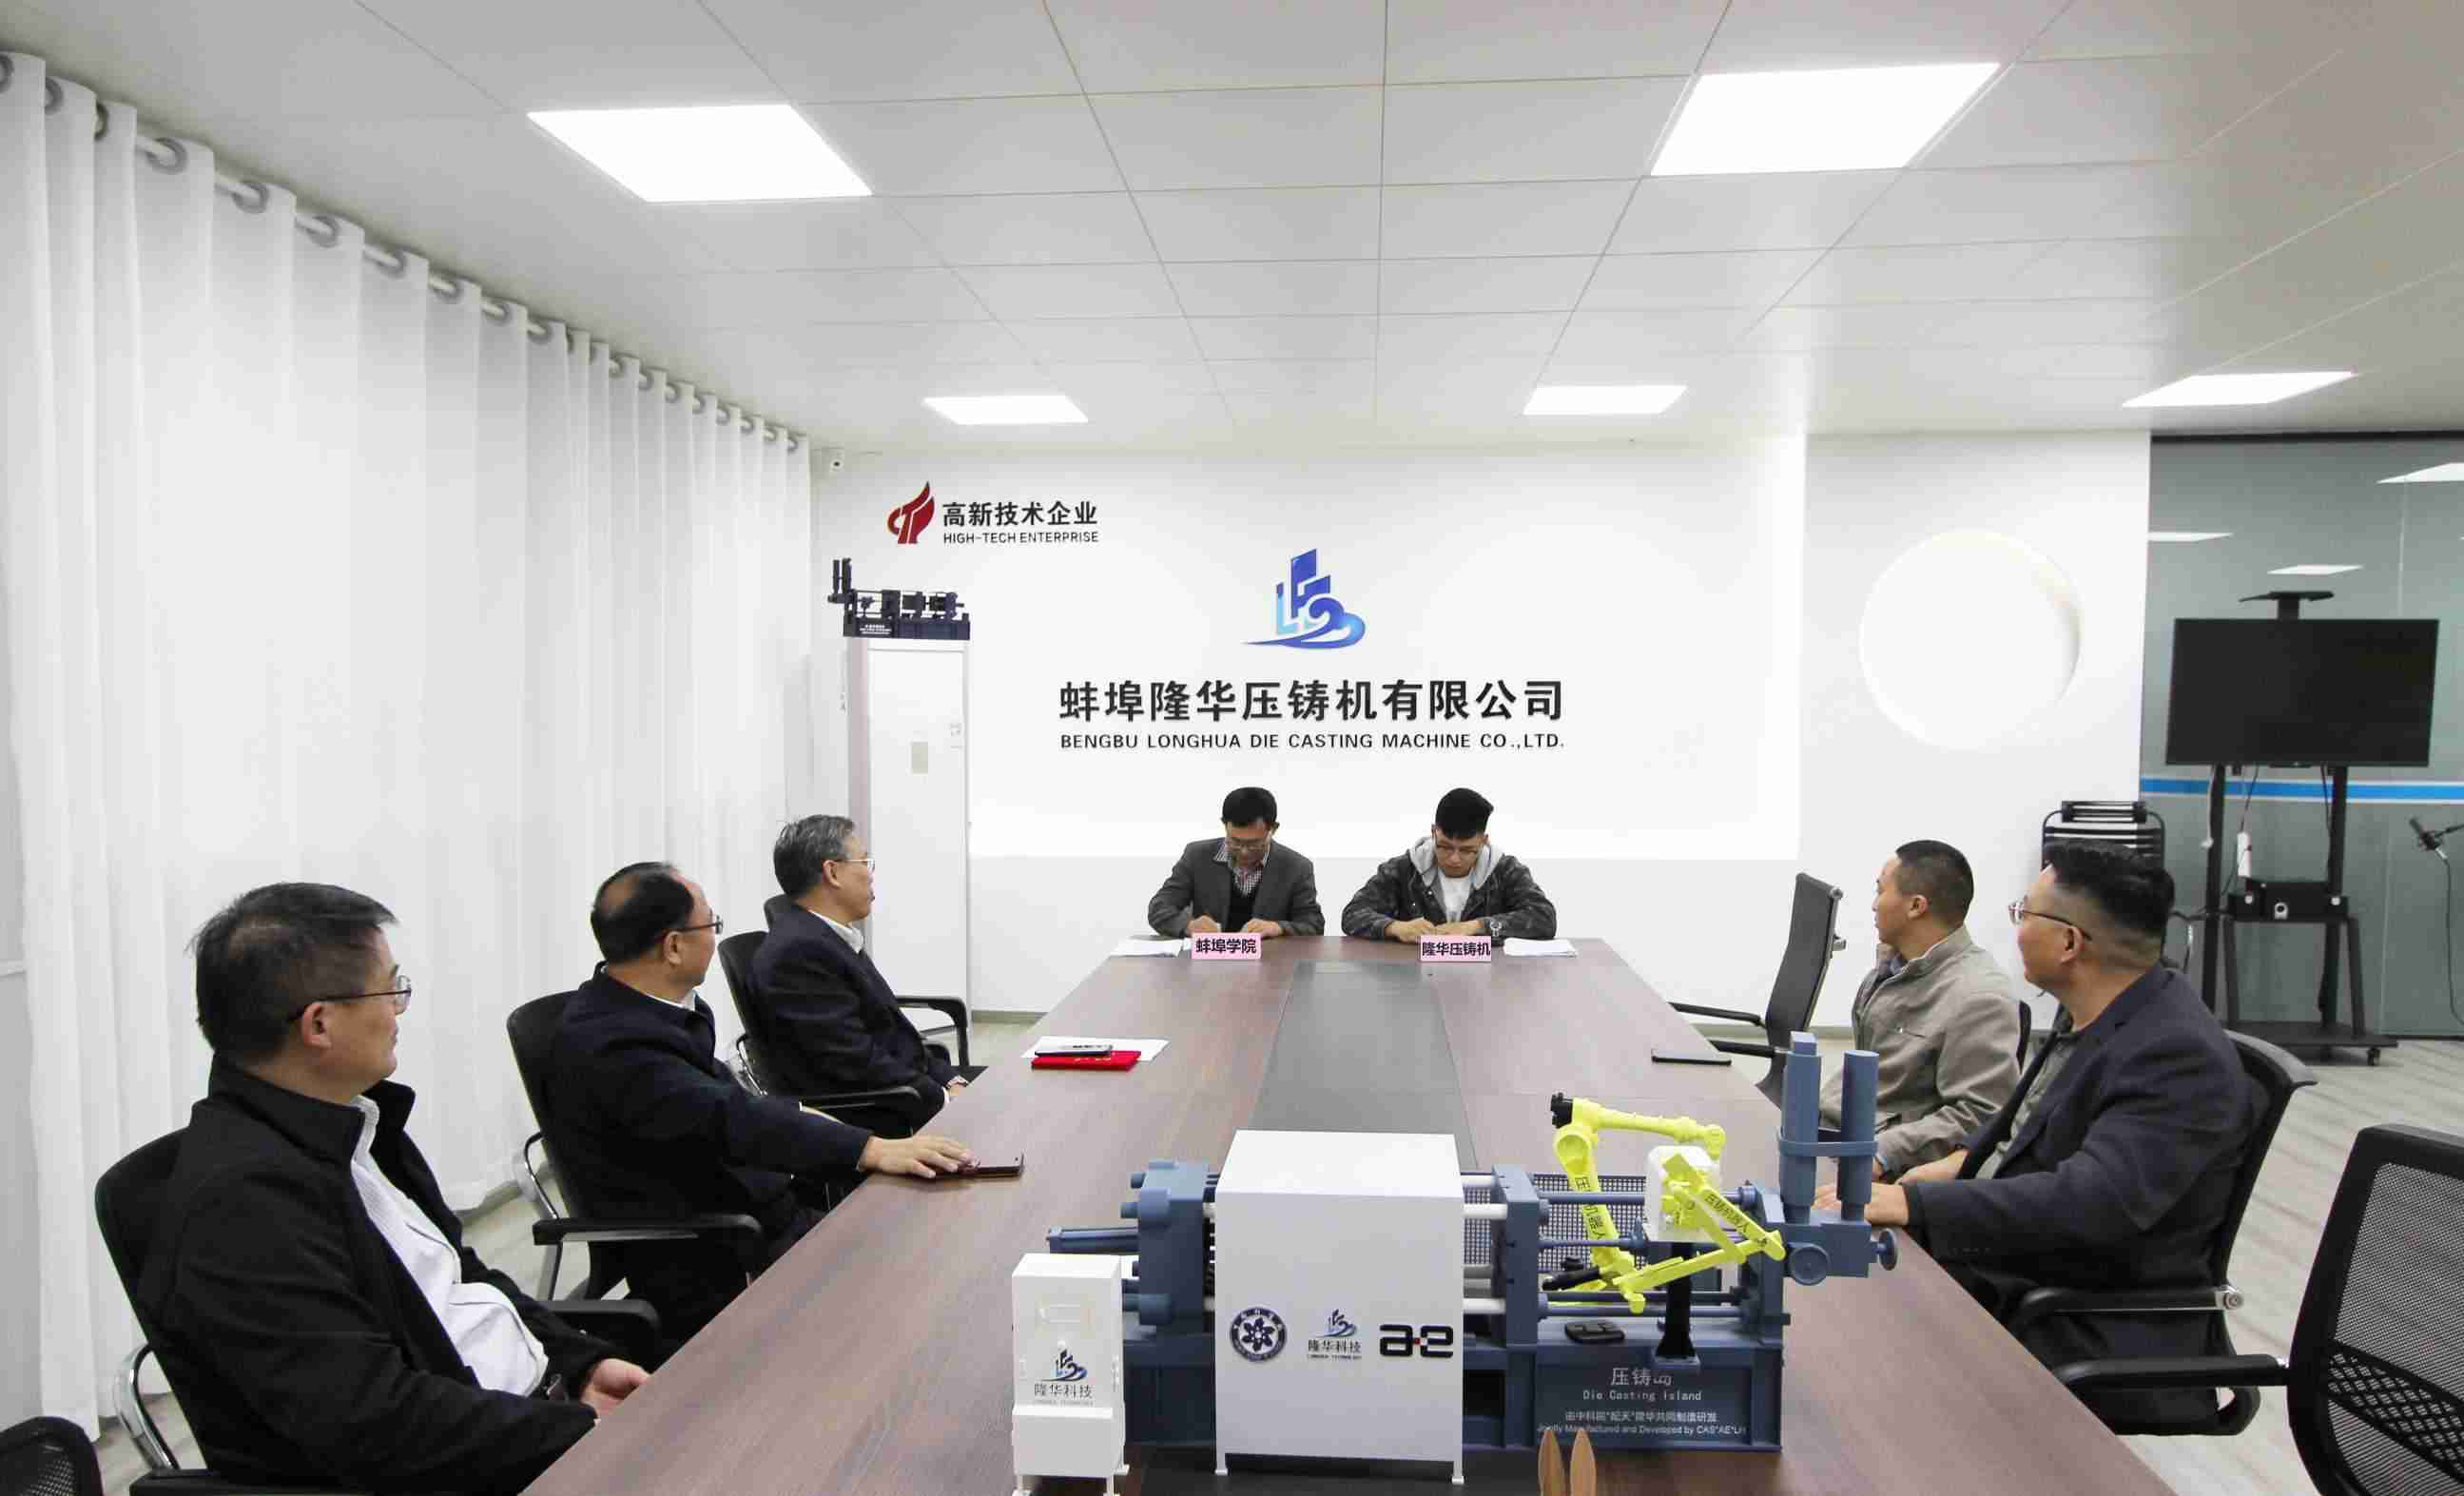 Bengbu Longhua and Bengbu College signed the R&D cooperation agreement of 